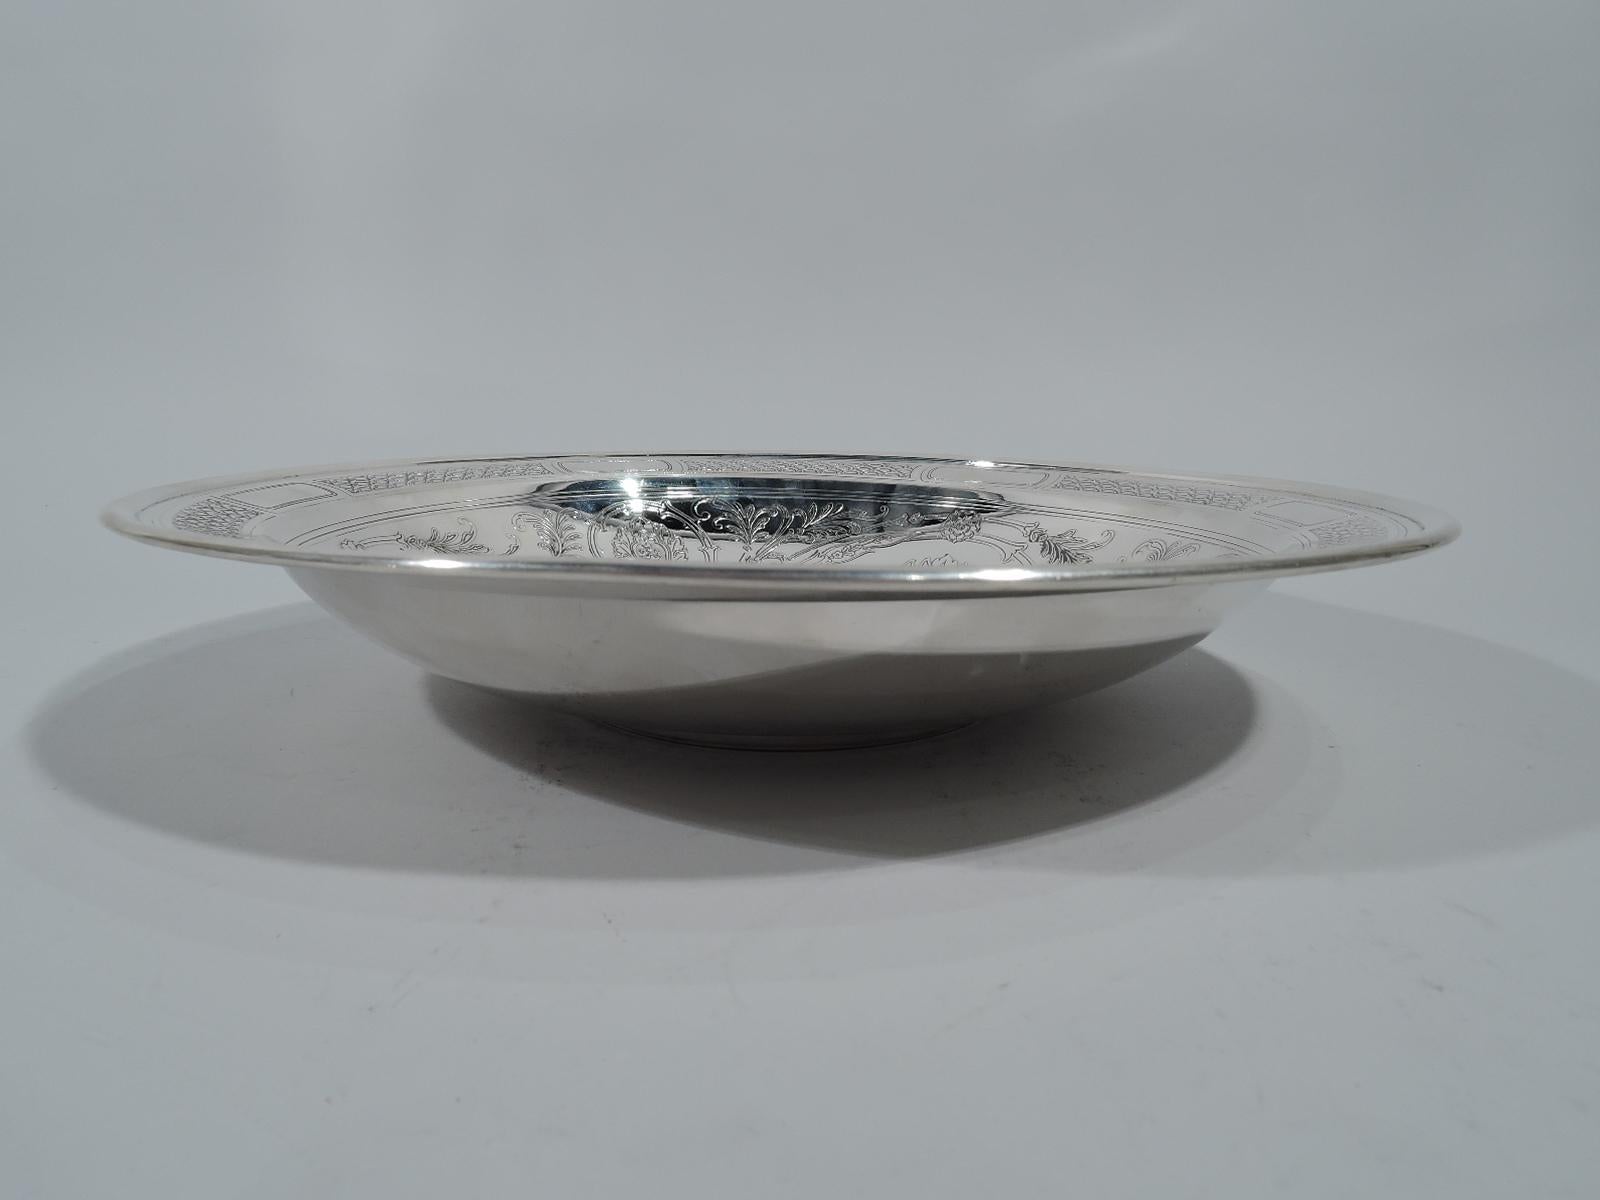 Aesthetic sterling silver bowl. Made by Tiffany & Co. in New York, circa 1914. Round with molded rim and foot ring. Acid-etched interior: A bird with patterned plumage and loose foliate scrolls with flame flowers. Rim has cartouches (vacant)